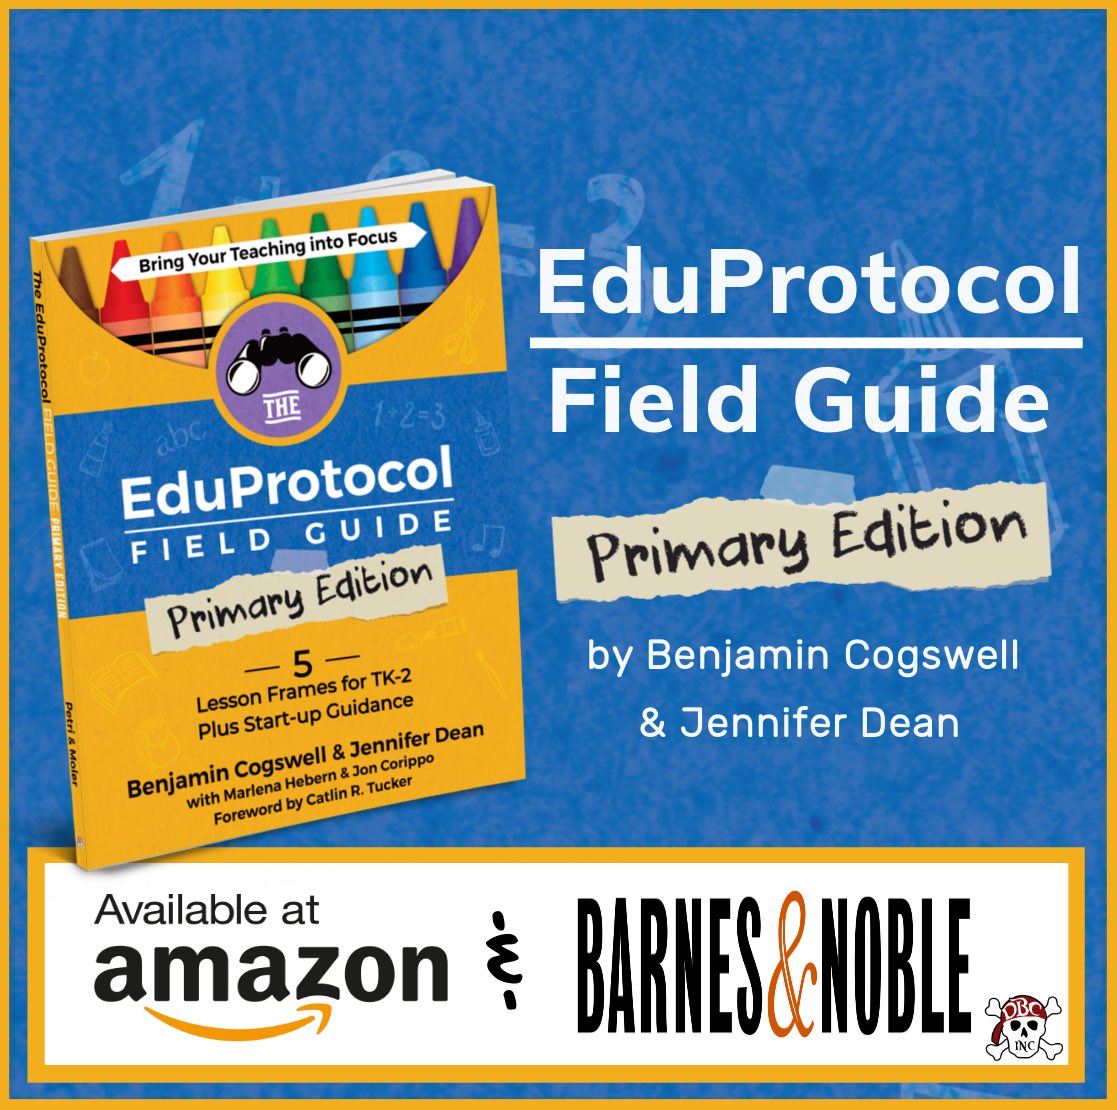 We are over the moon excited to share that the long awaited @eduprotocols Primary Edition is here & available for purchase! Please post a picture of yourself with the book in the comments when you get your copy! #EduProtocols #k2cantoo a.co/d/bQQiZqF